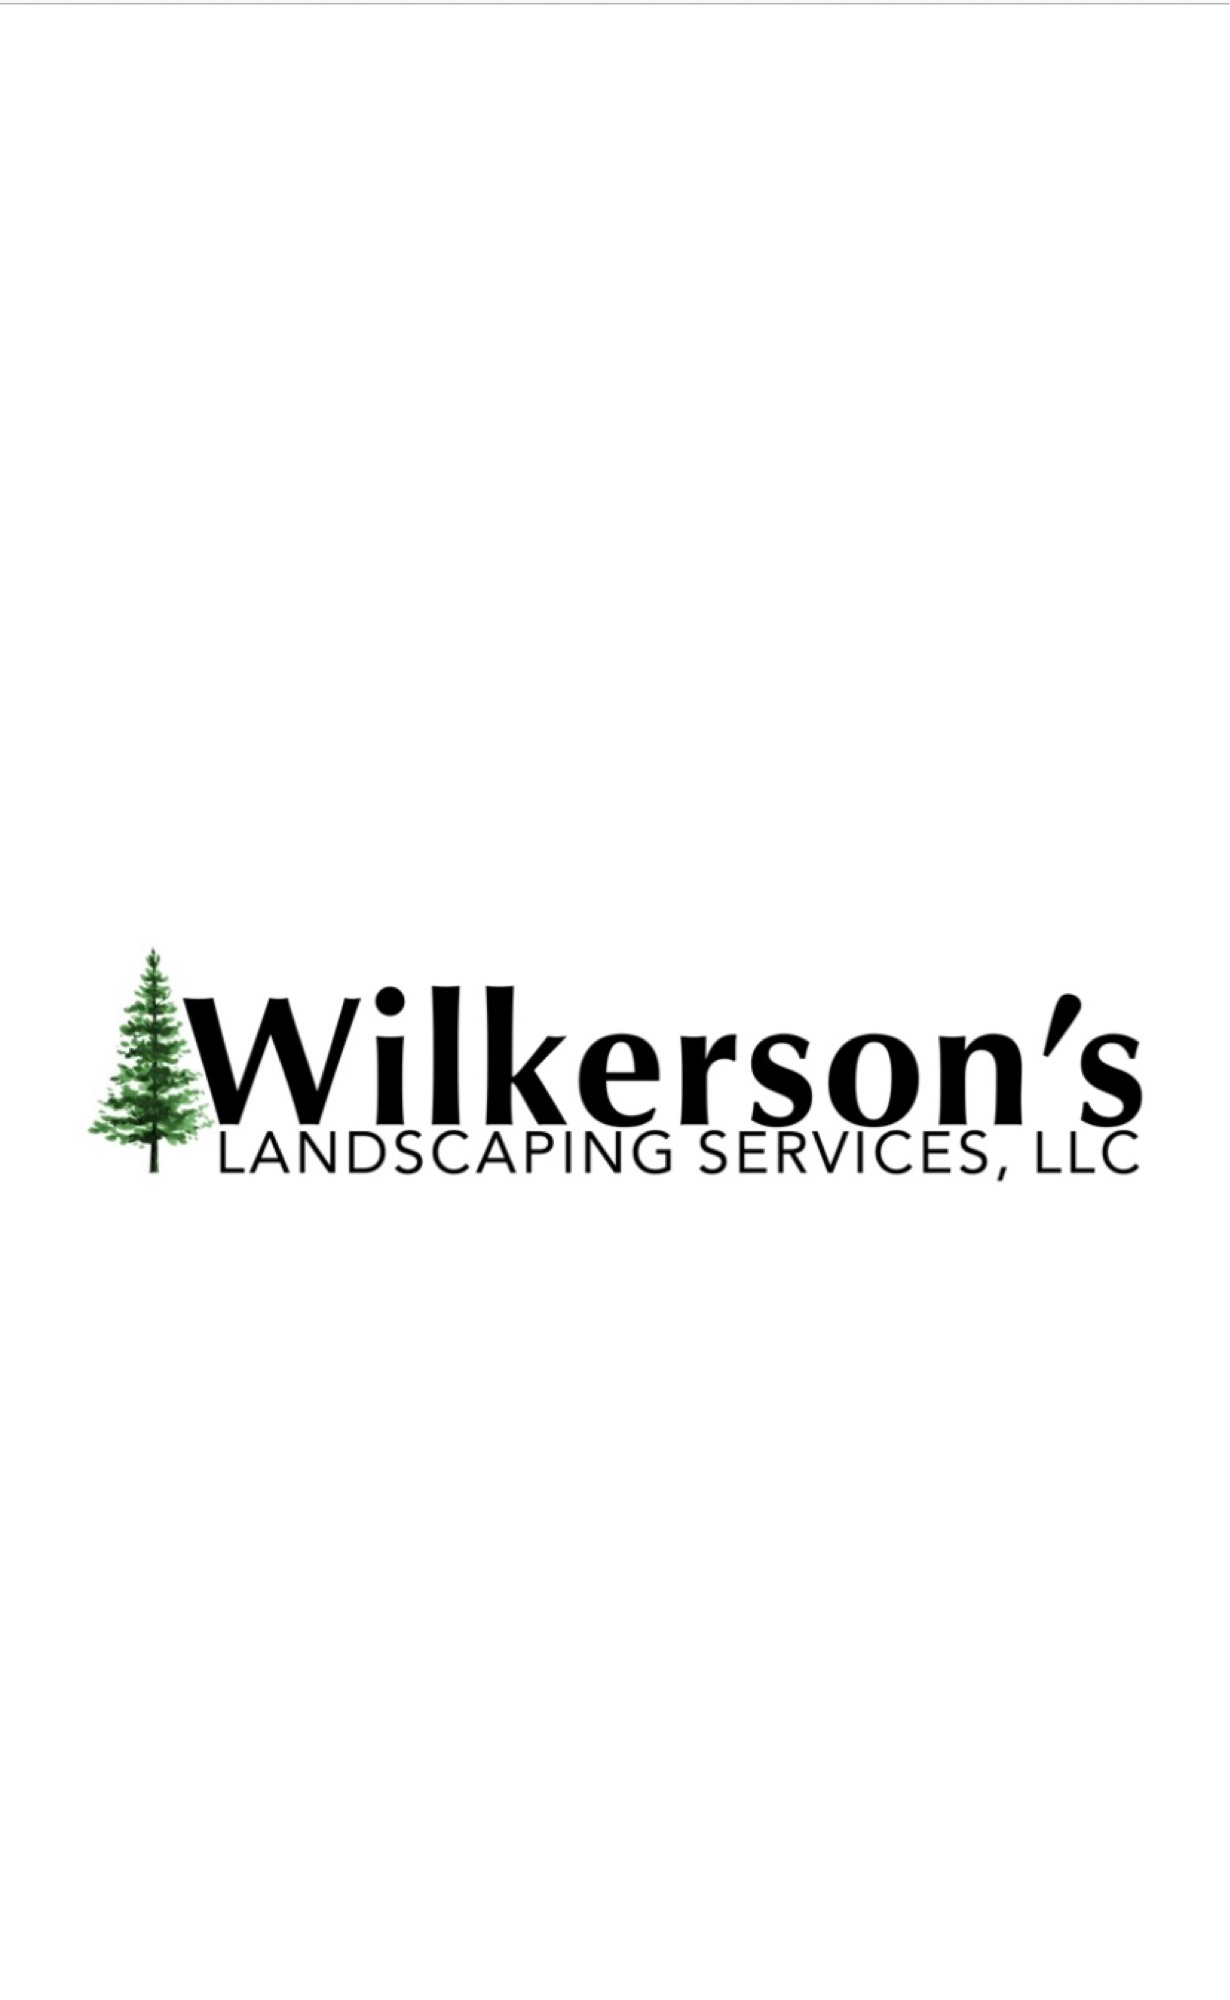 Wilkerson's Landscaping Services Logo